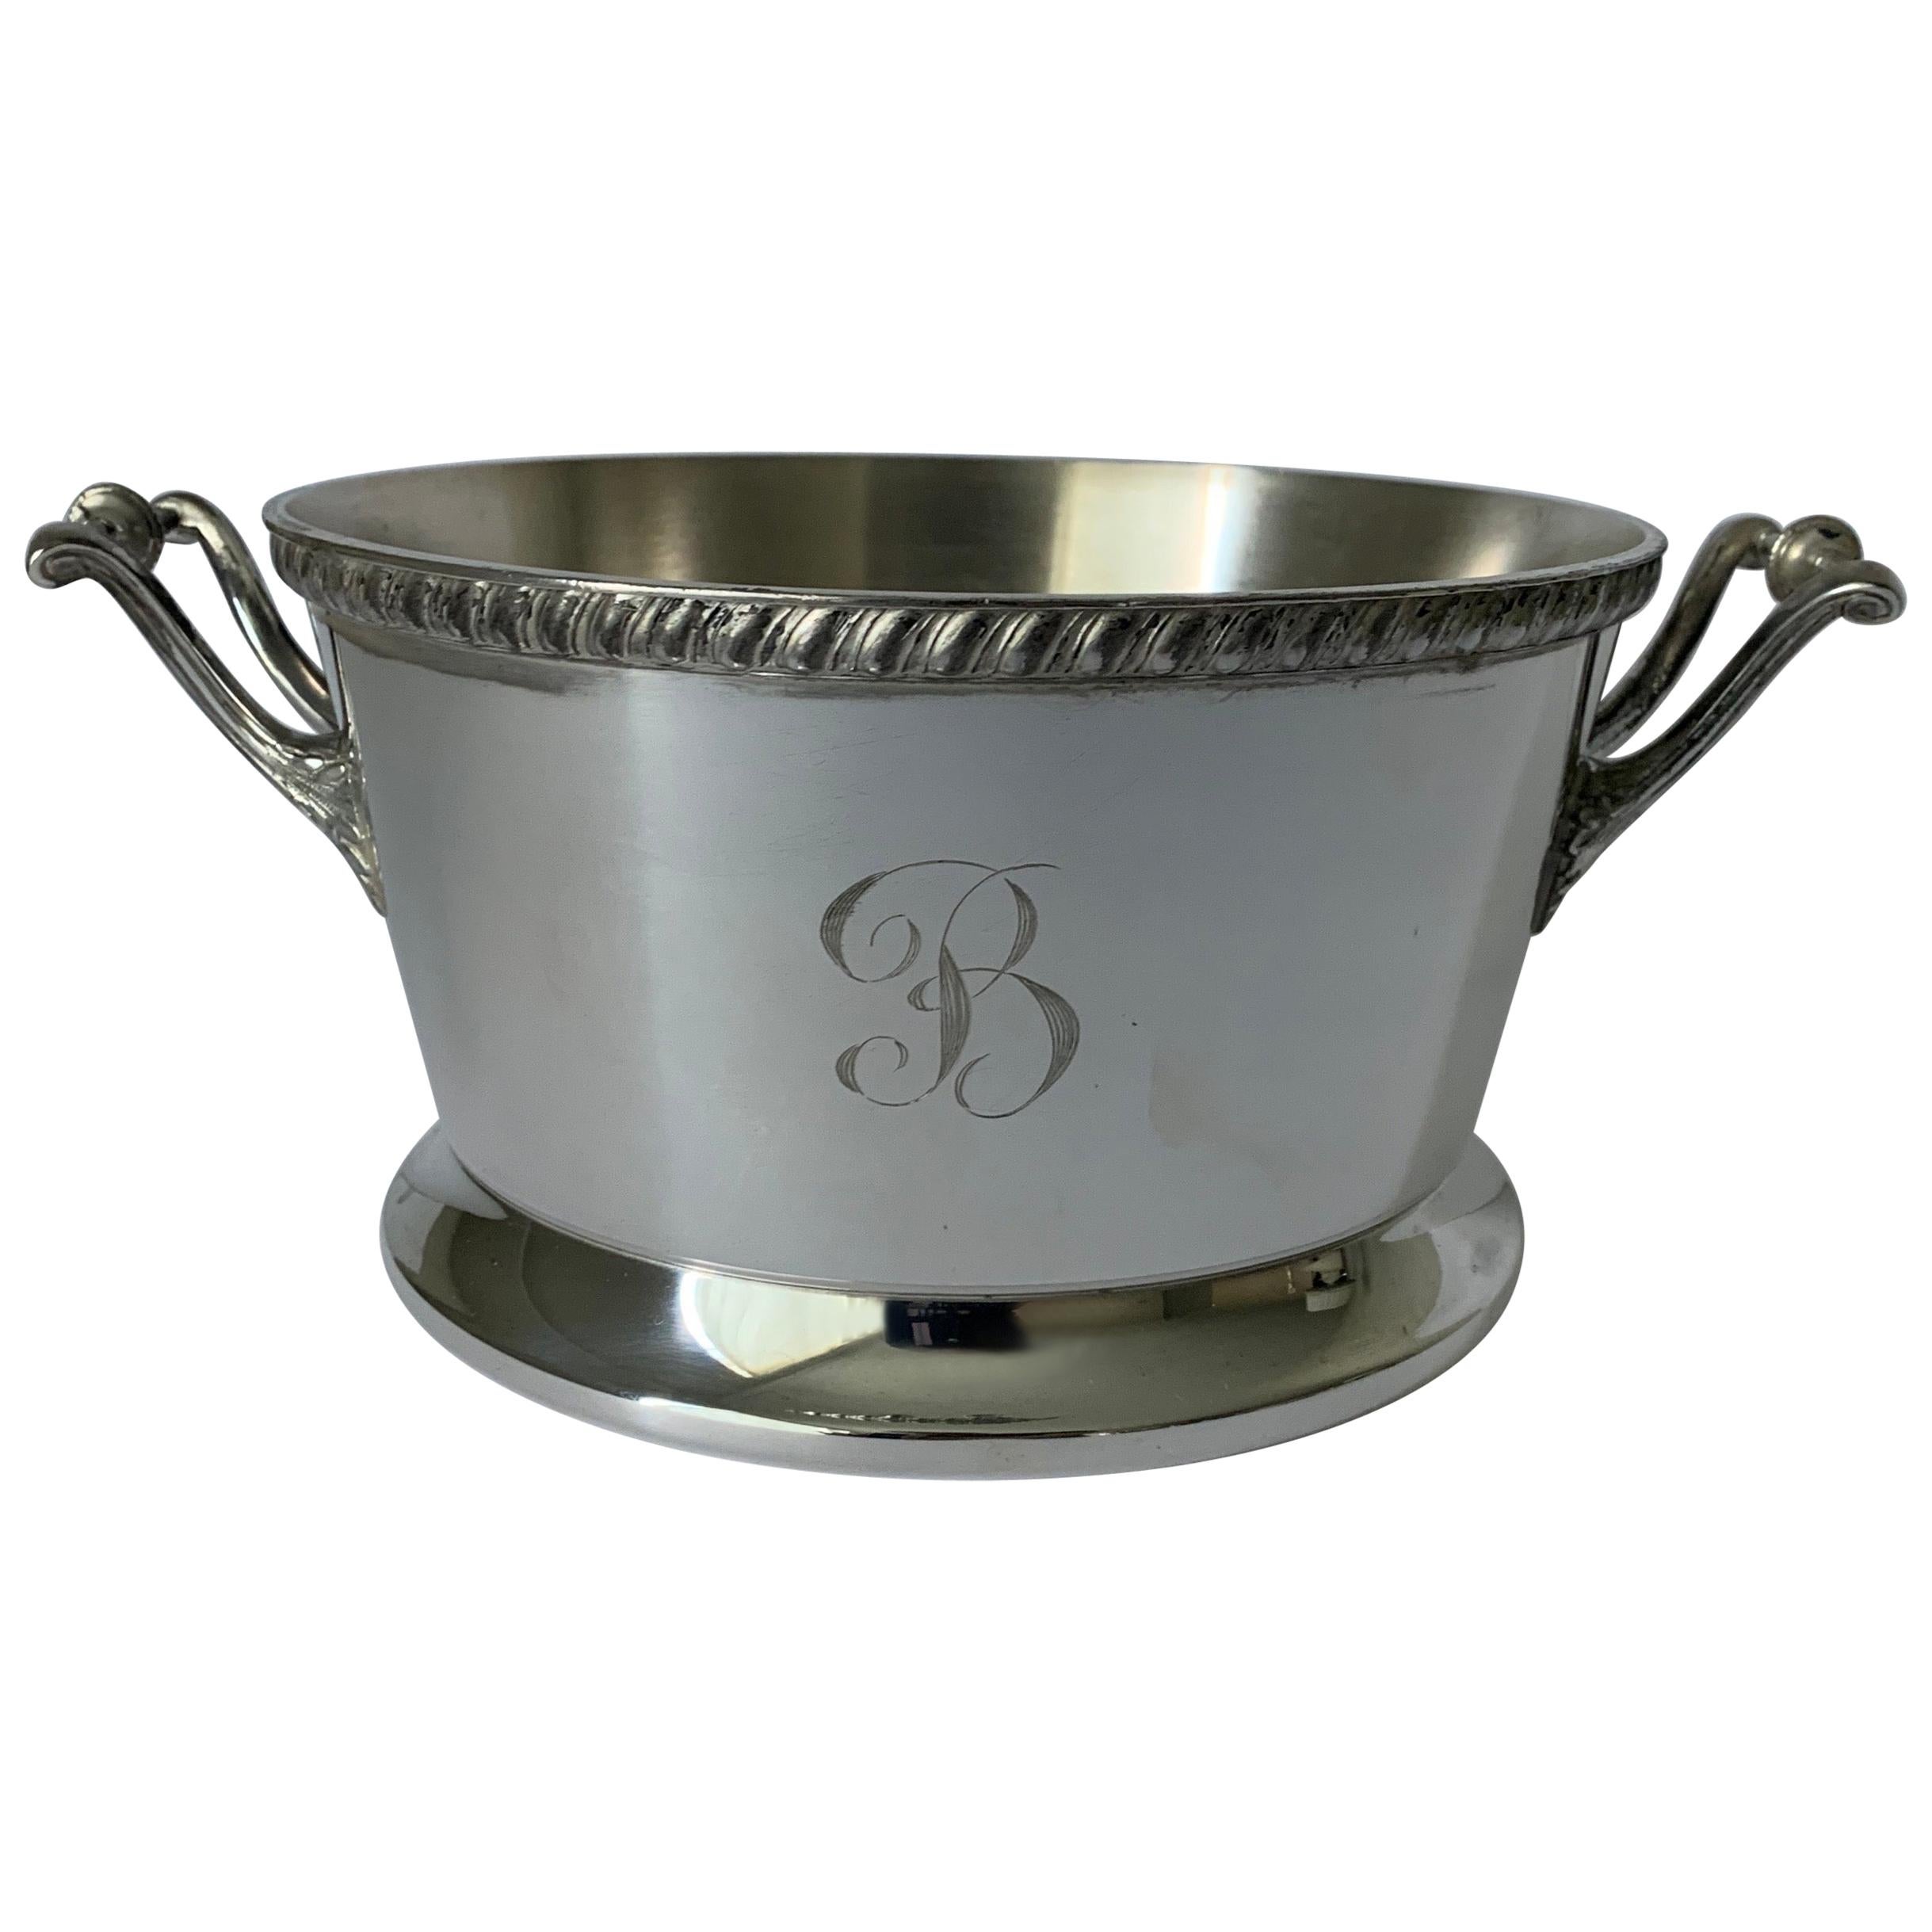 Silver Planter or Bucket with B Monogram For Sale